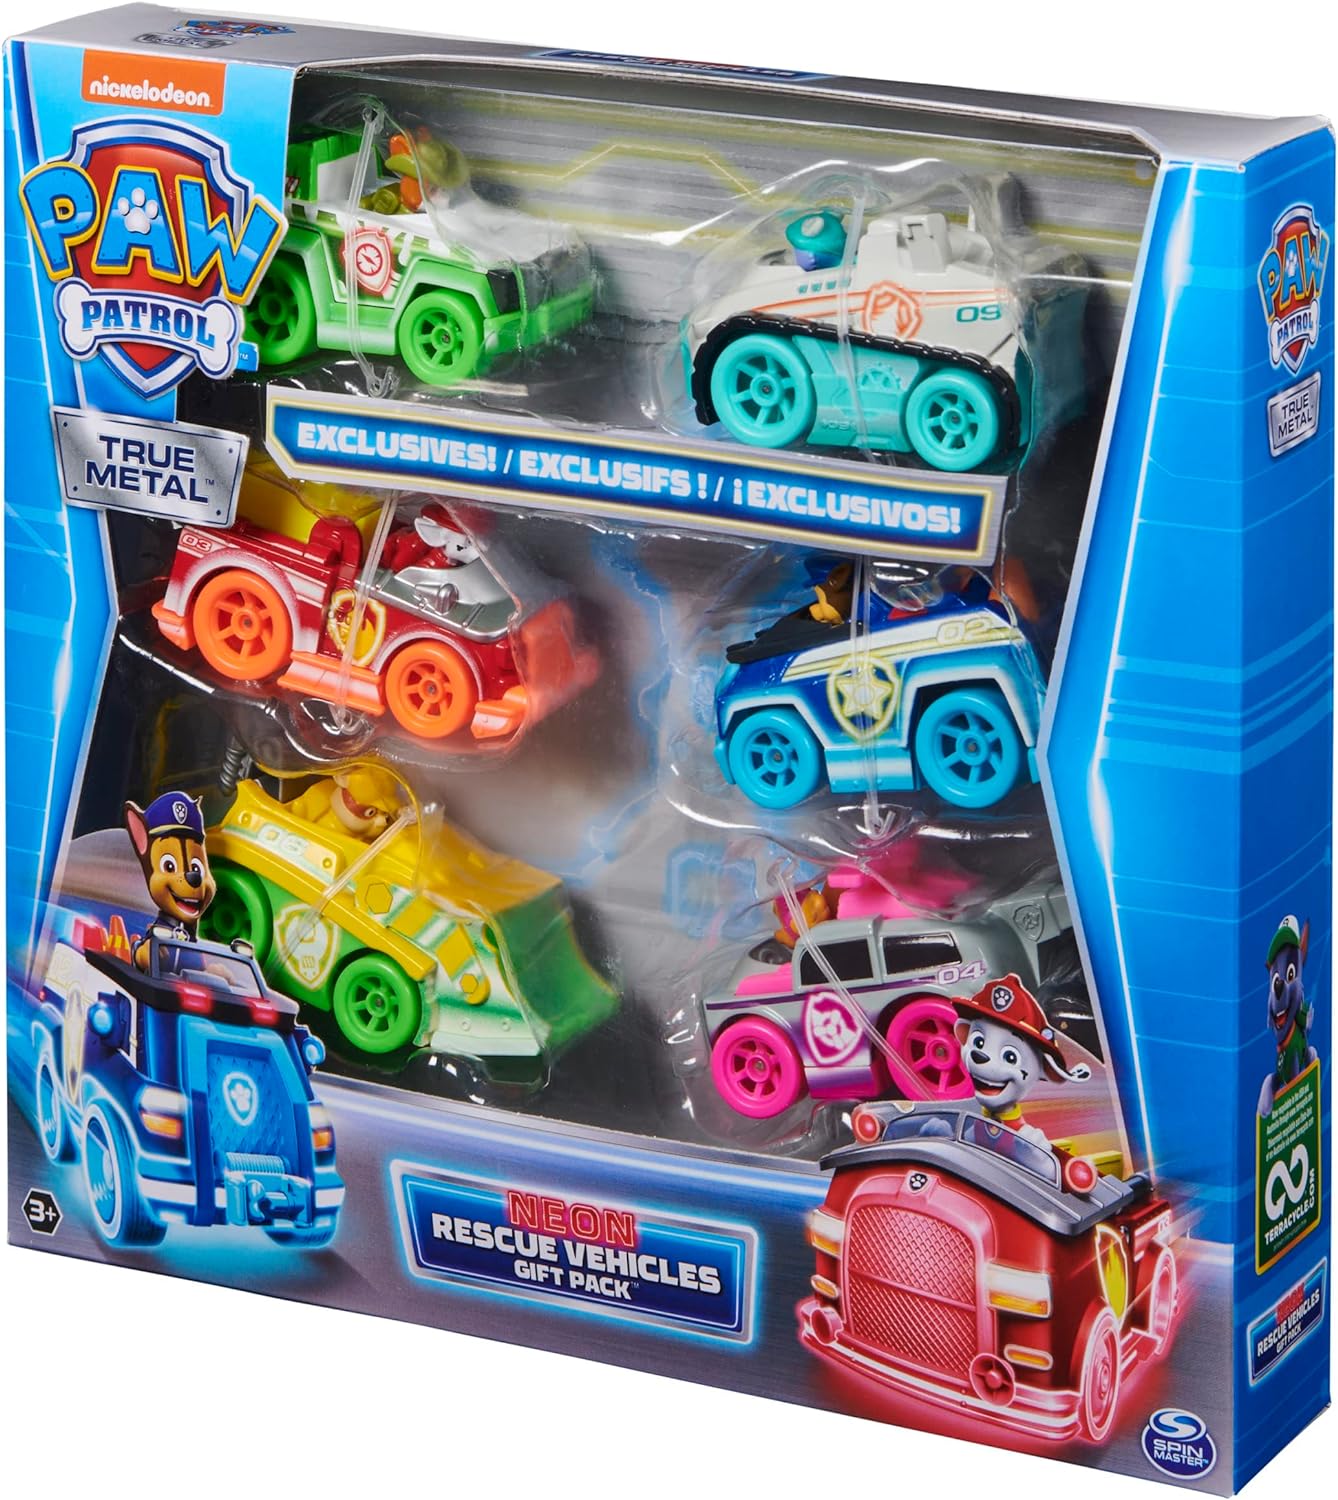 Paw Patrol Neon Rescue Vehicle Review